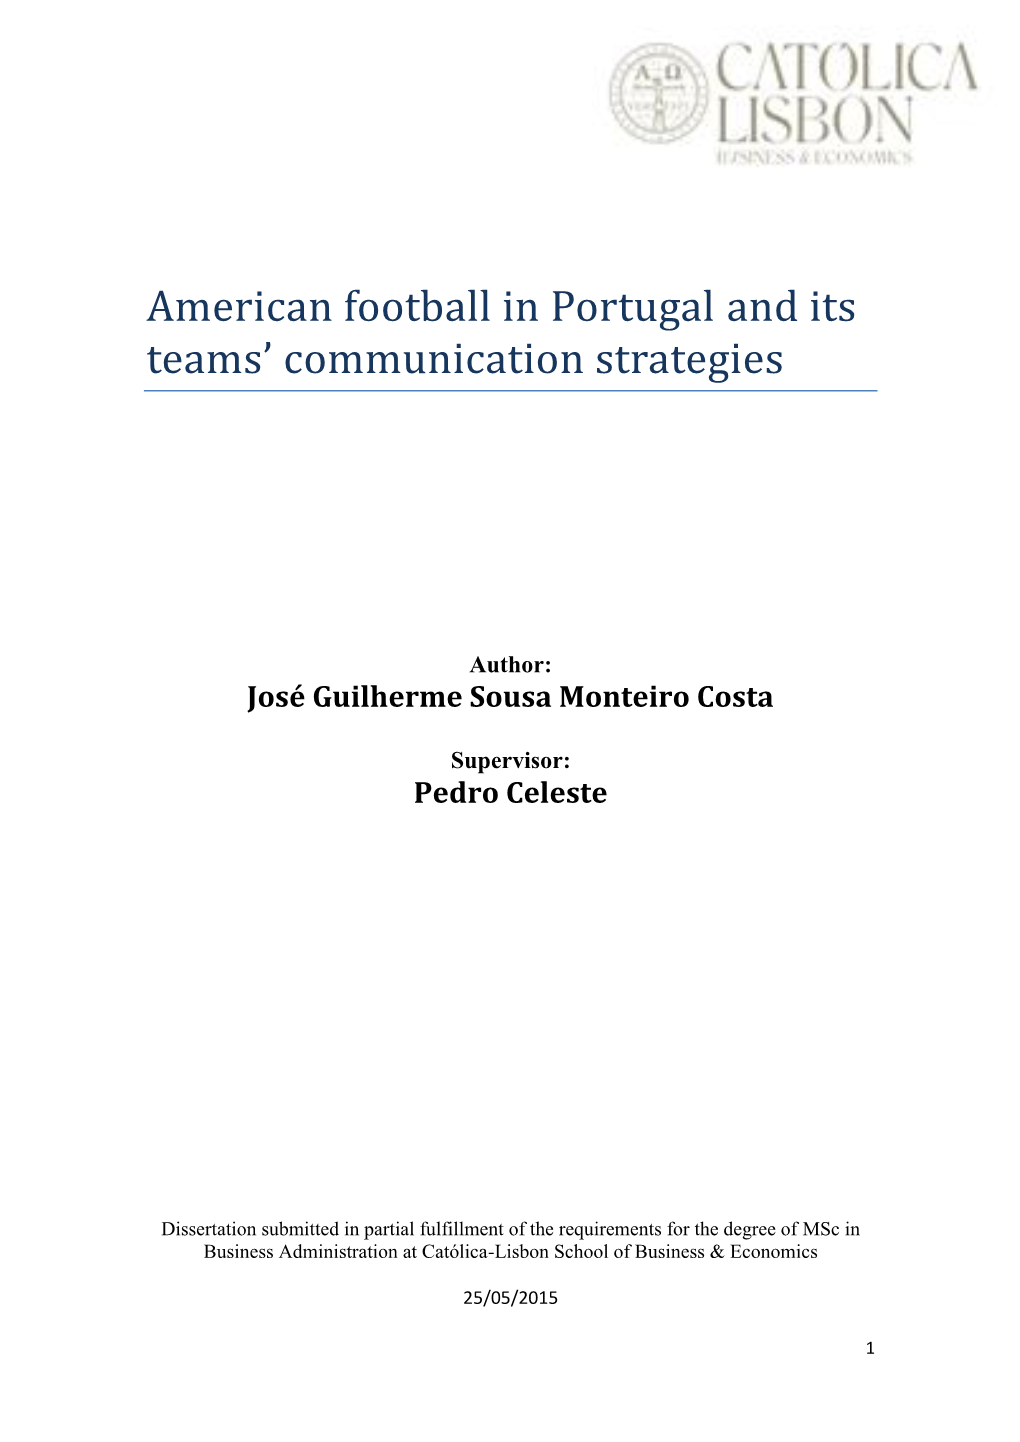 American Football in Portugal and Its Teams' Communication Strategies